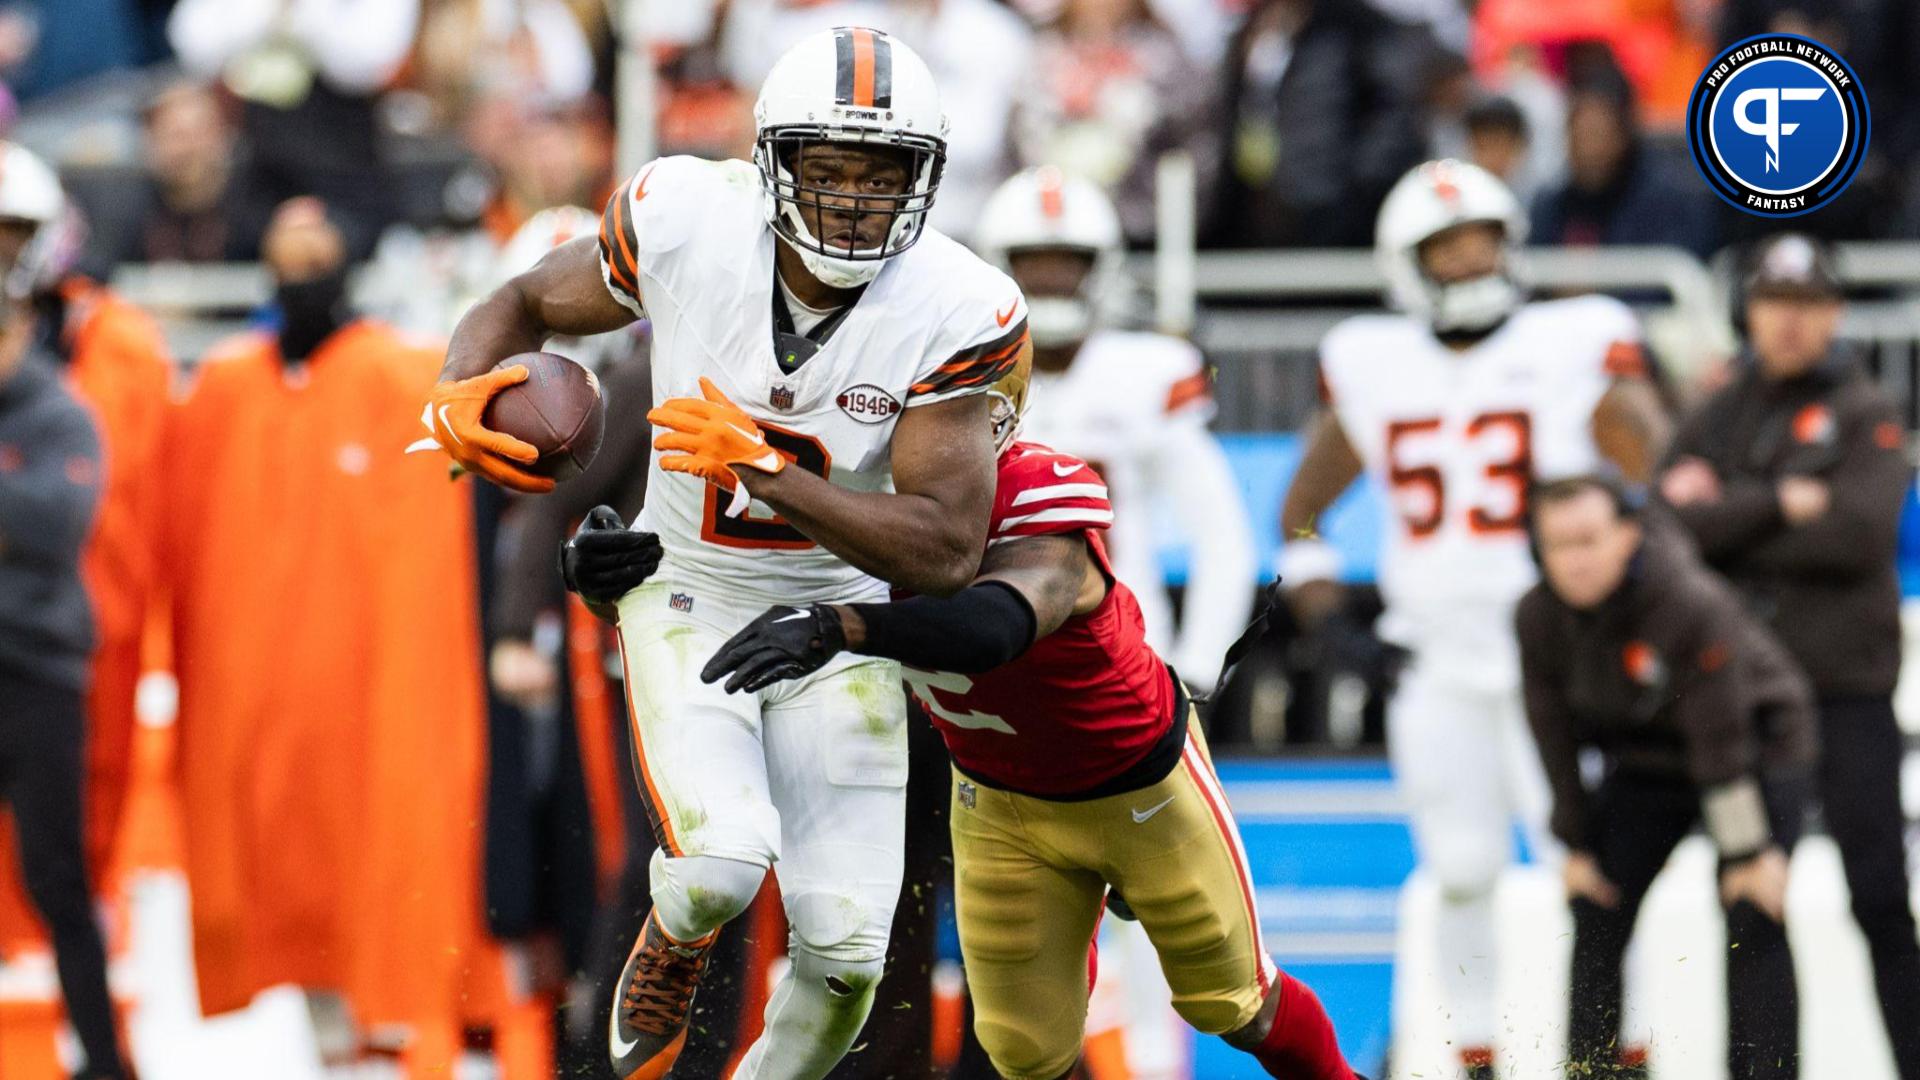 Cleveland Browns wide receiver Amari Cooper (2) runs the ball as San Francisco 49ers cornerback Deommodore Lenoir (2) pulls him down from behind during the fourth quarter at Cleveland Browns Stadium.